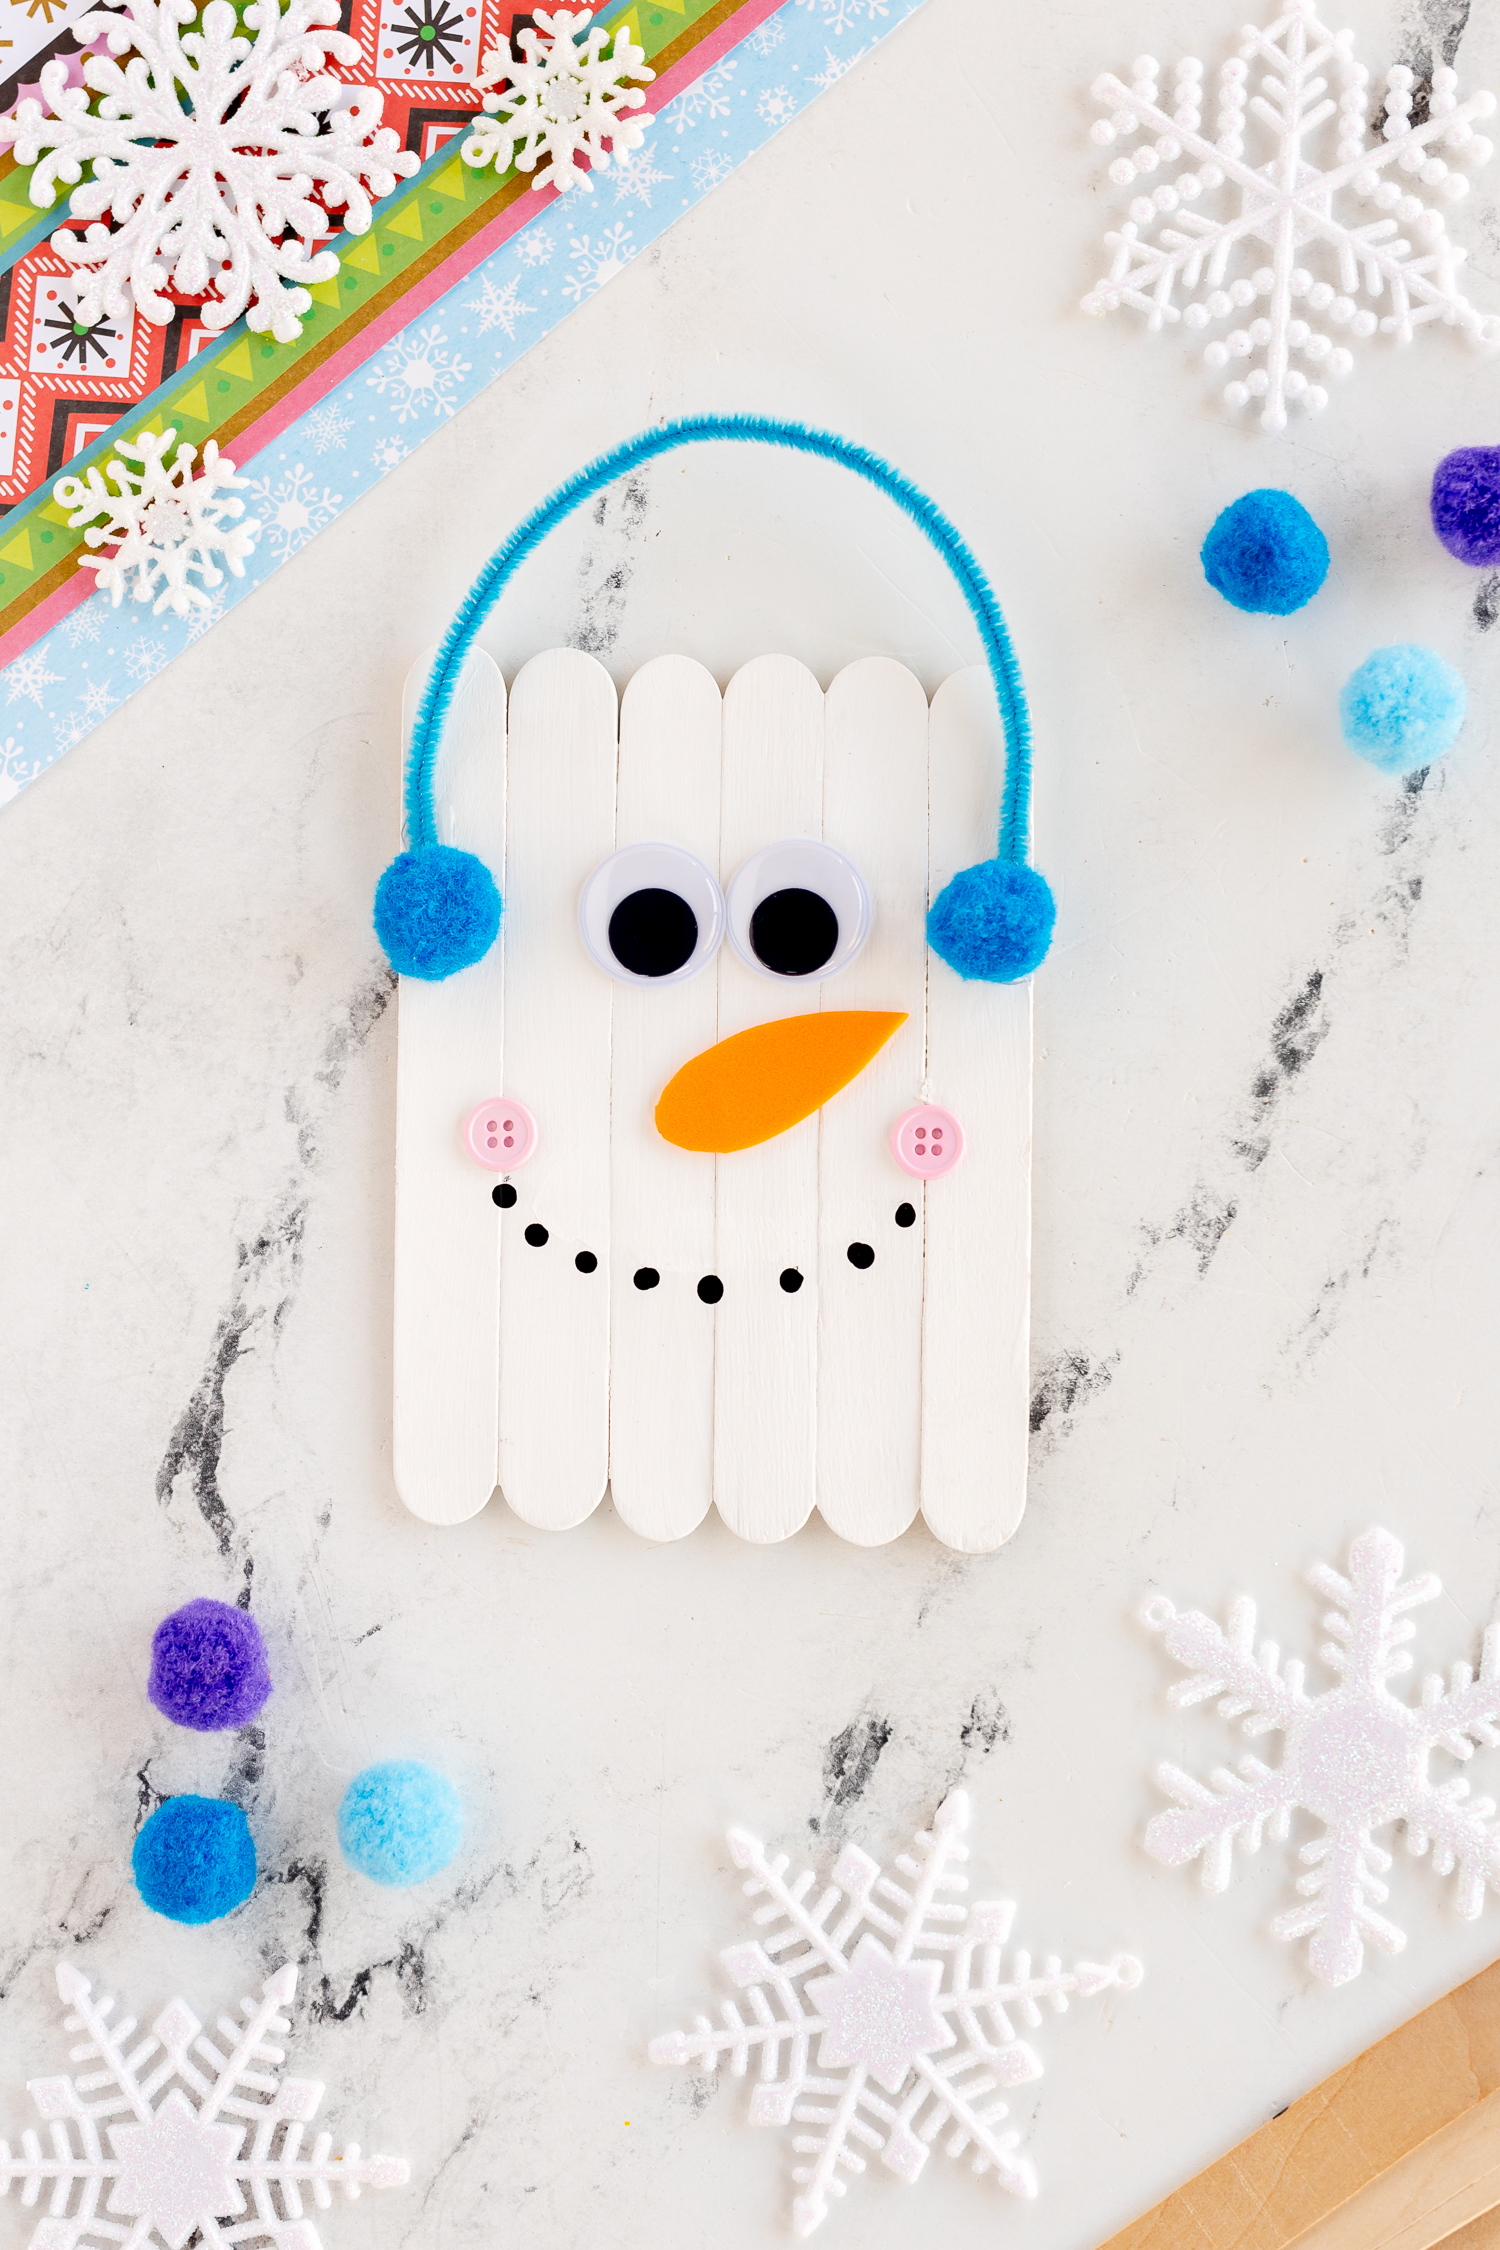 Popsicle Stick Snowman Craft with blue earmuffs made from pipe cleaner and pom poms